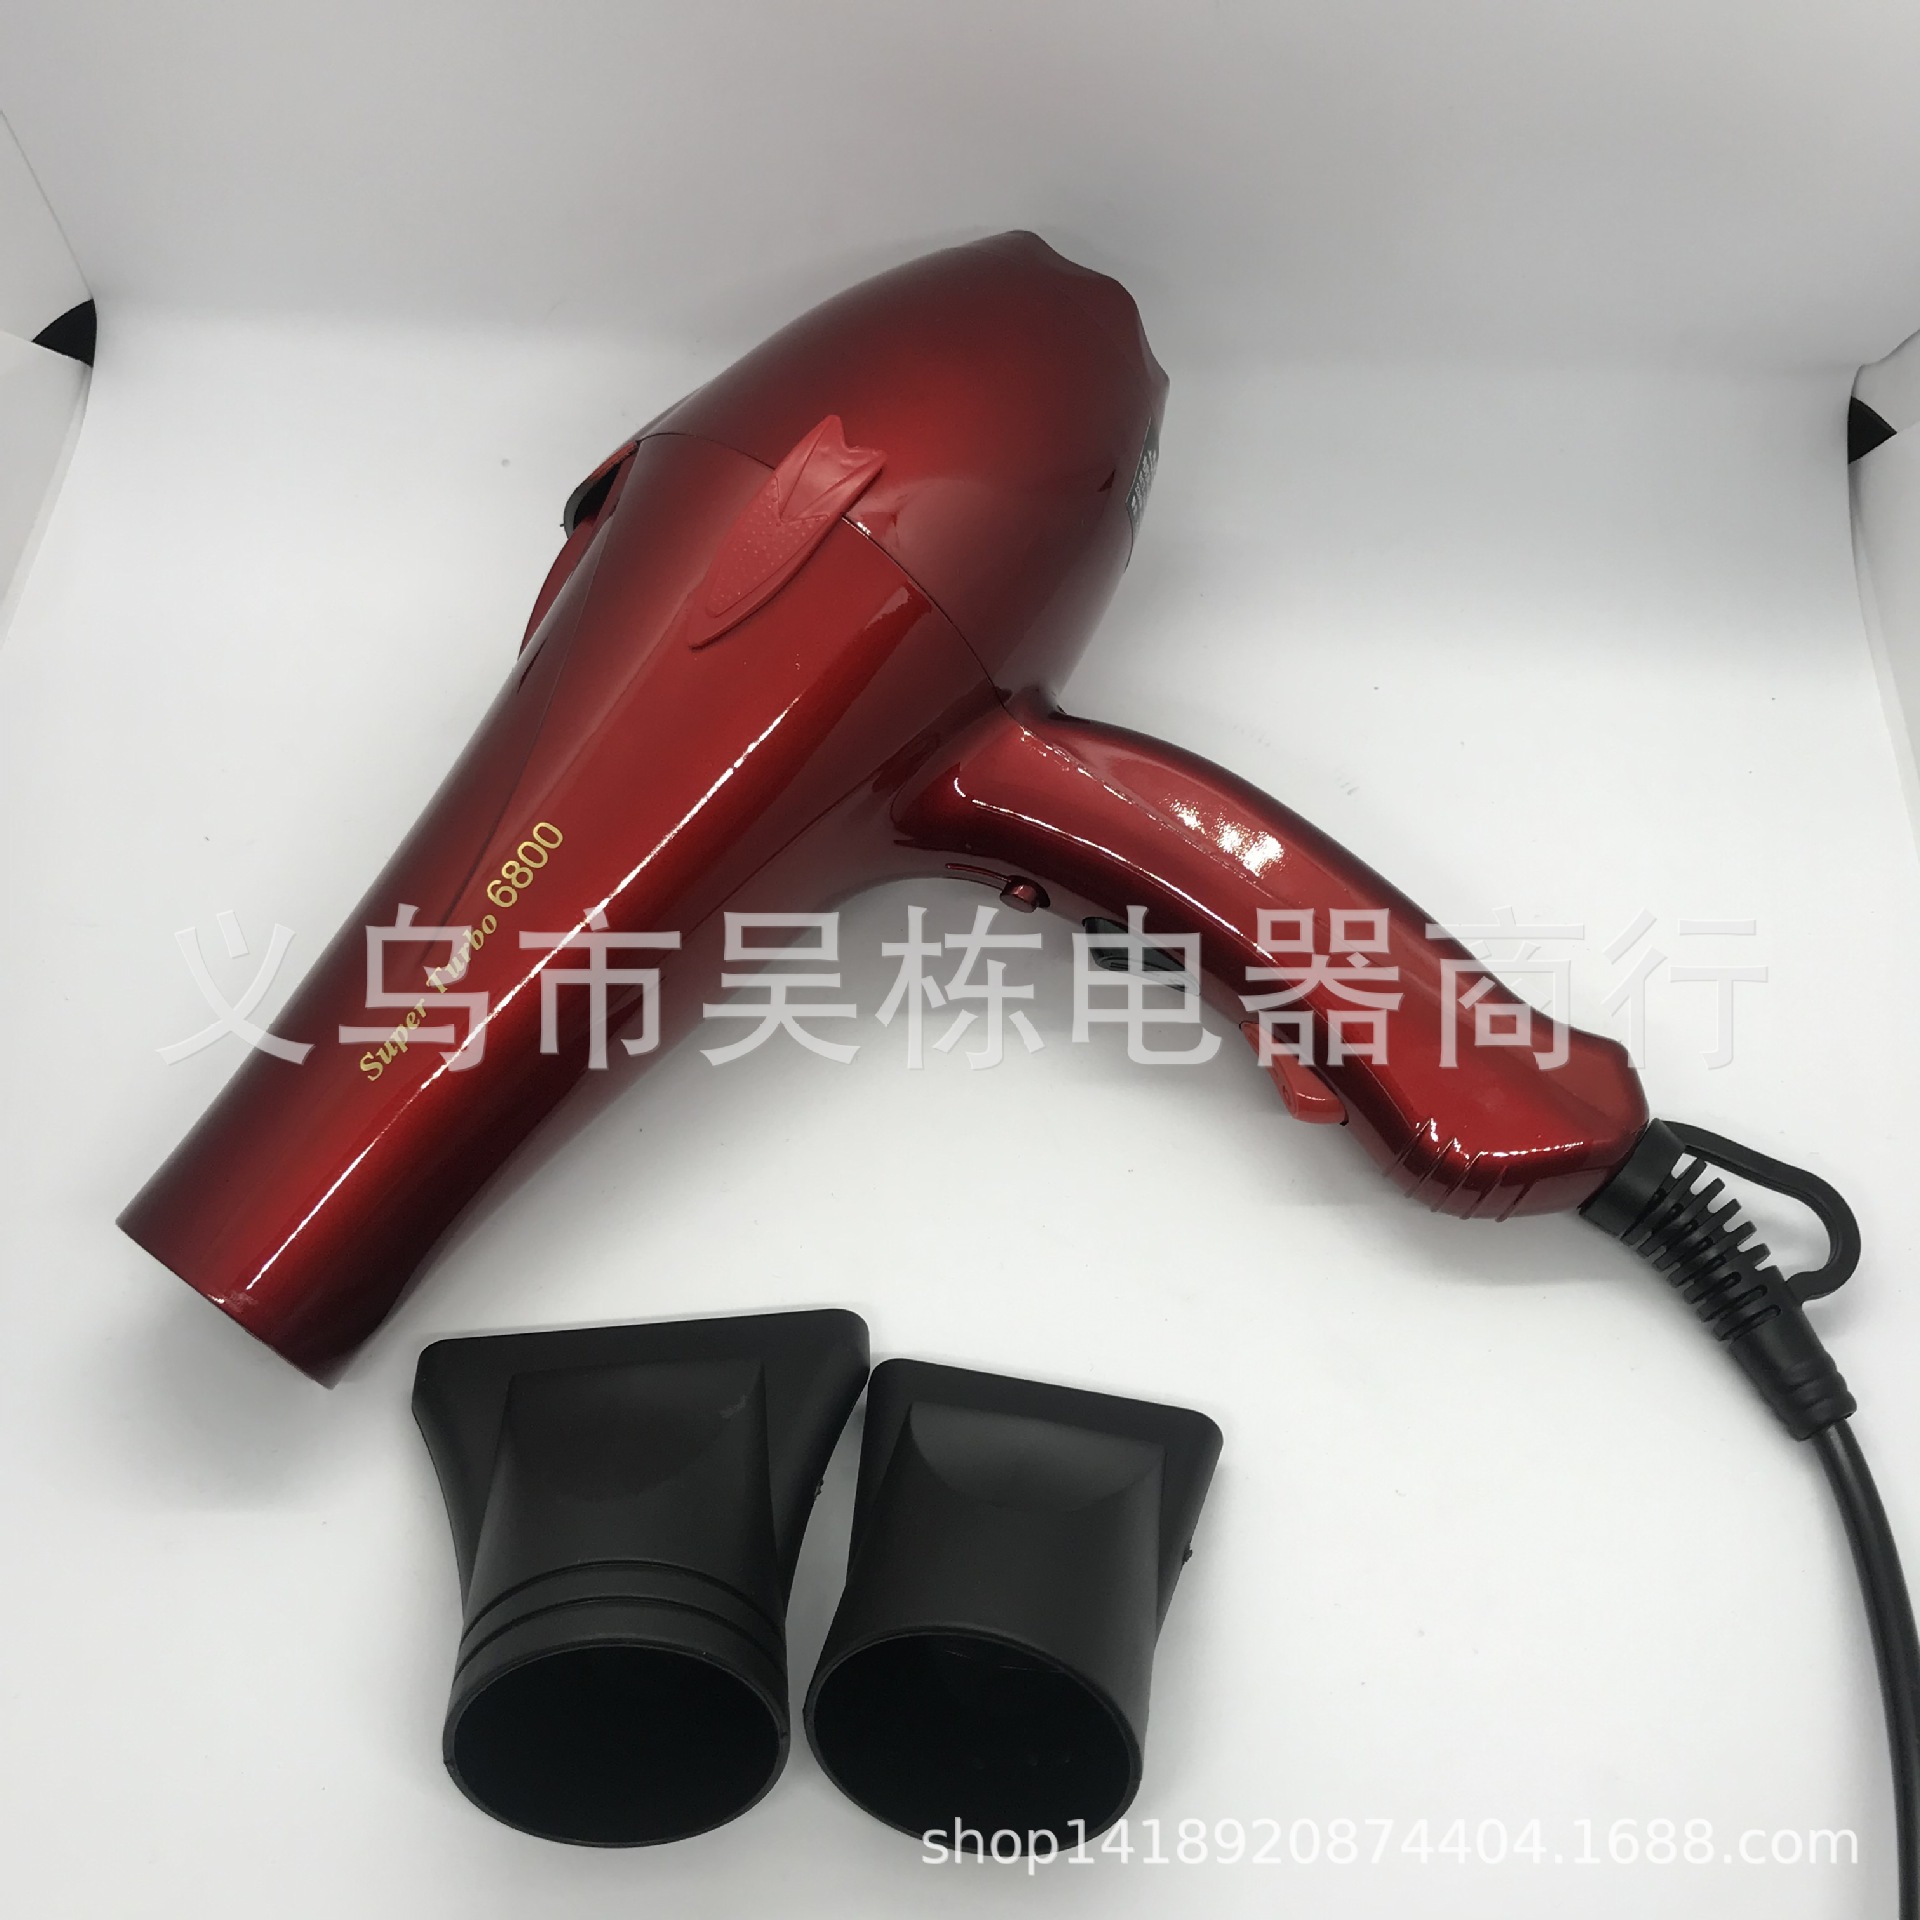 Hair Styling Heating and Cooling Air Adjustable Hair Dryer Wholesale Constant Temperature Hair Dryer Mute Design Fashion Hair Dryer